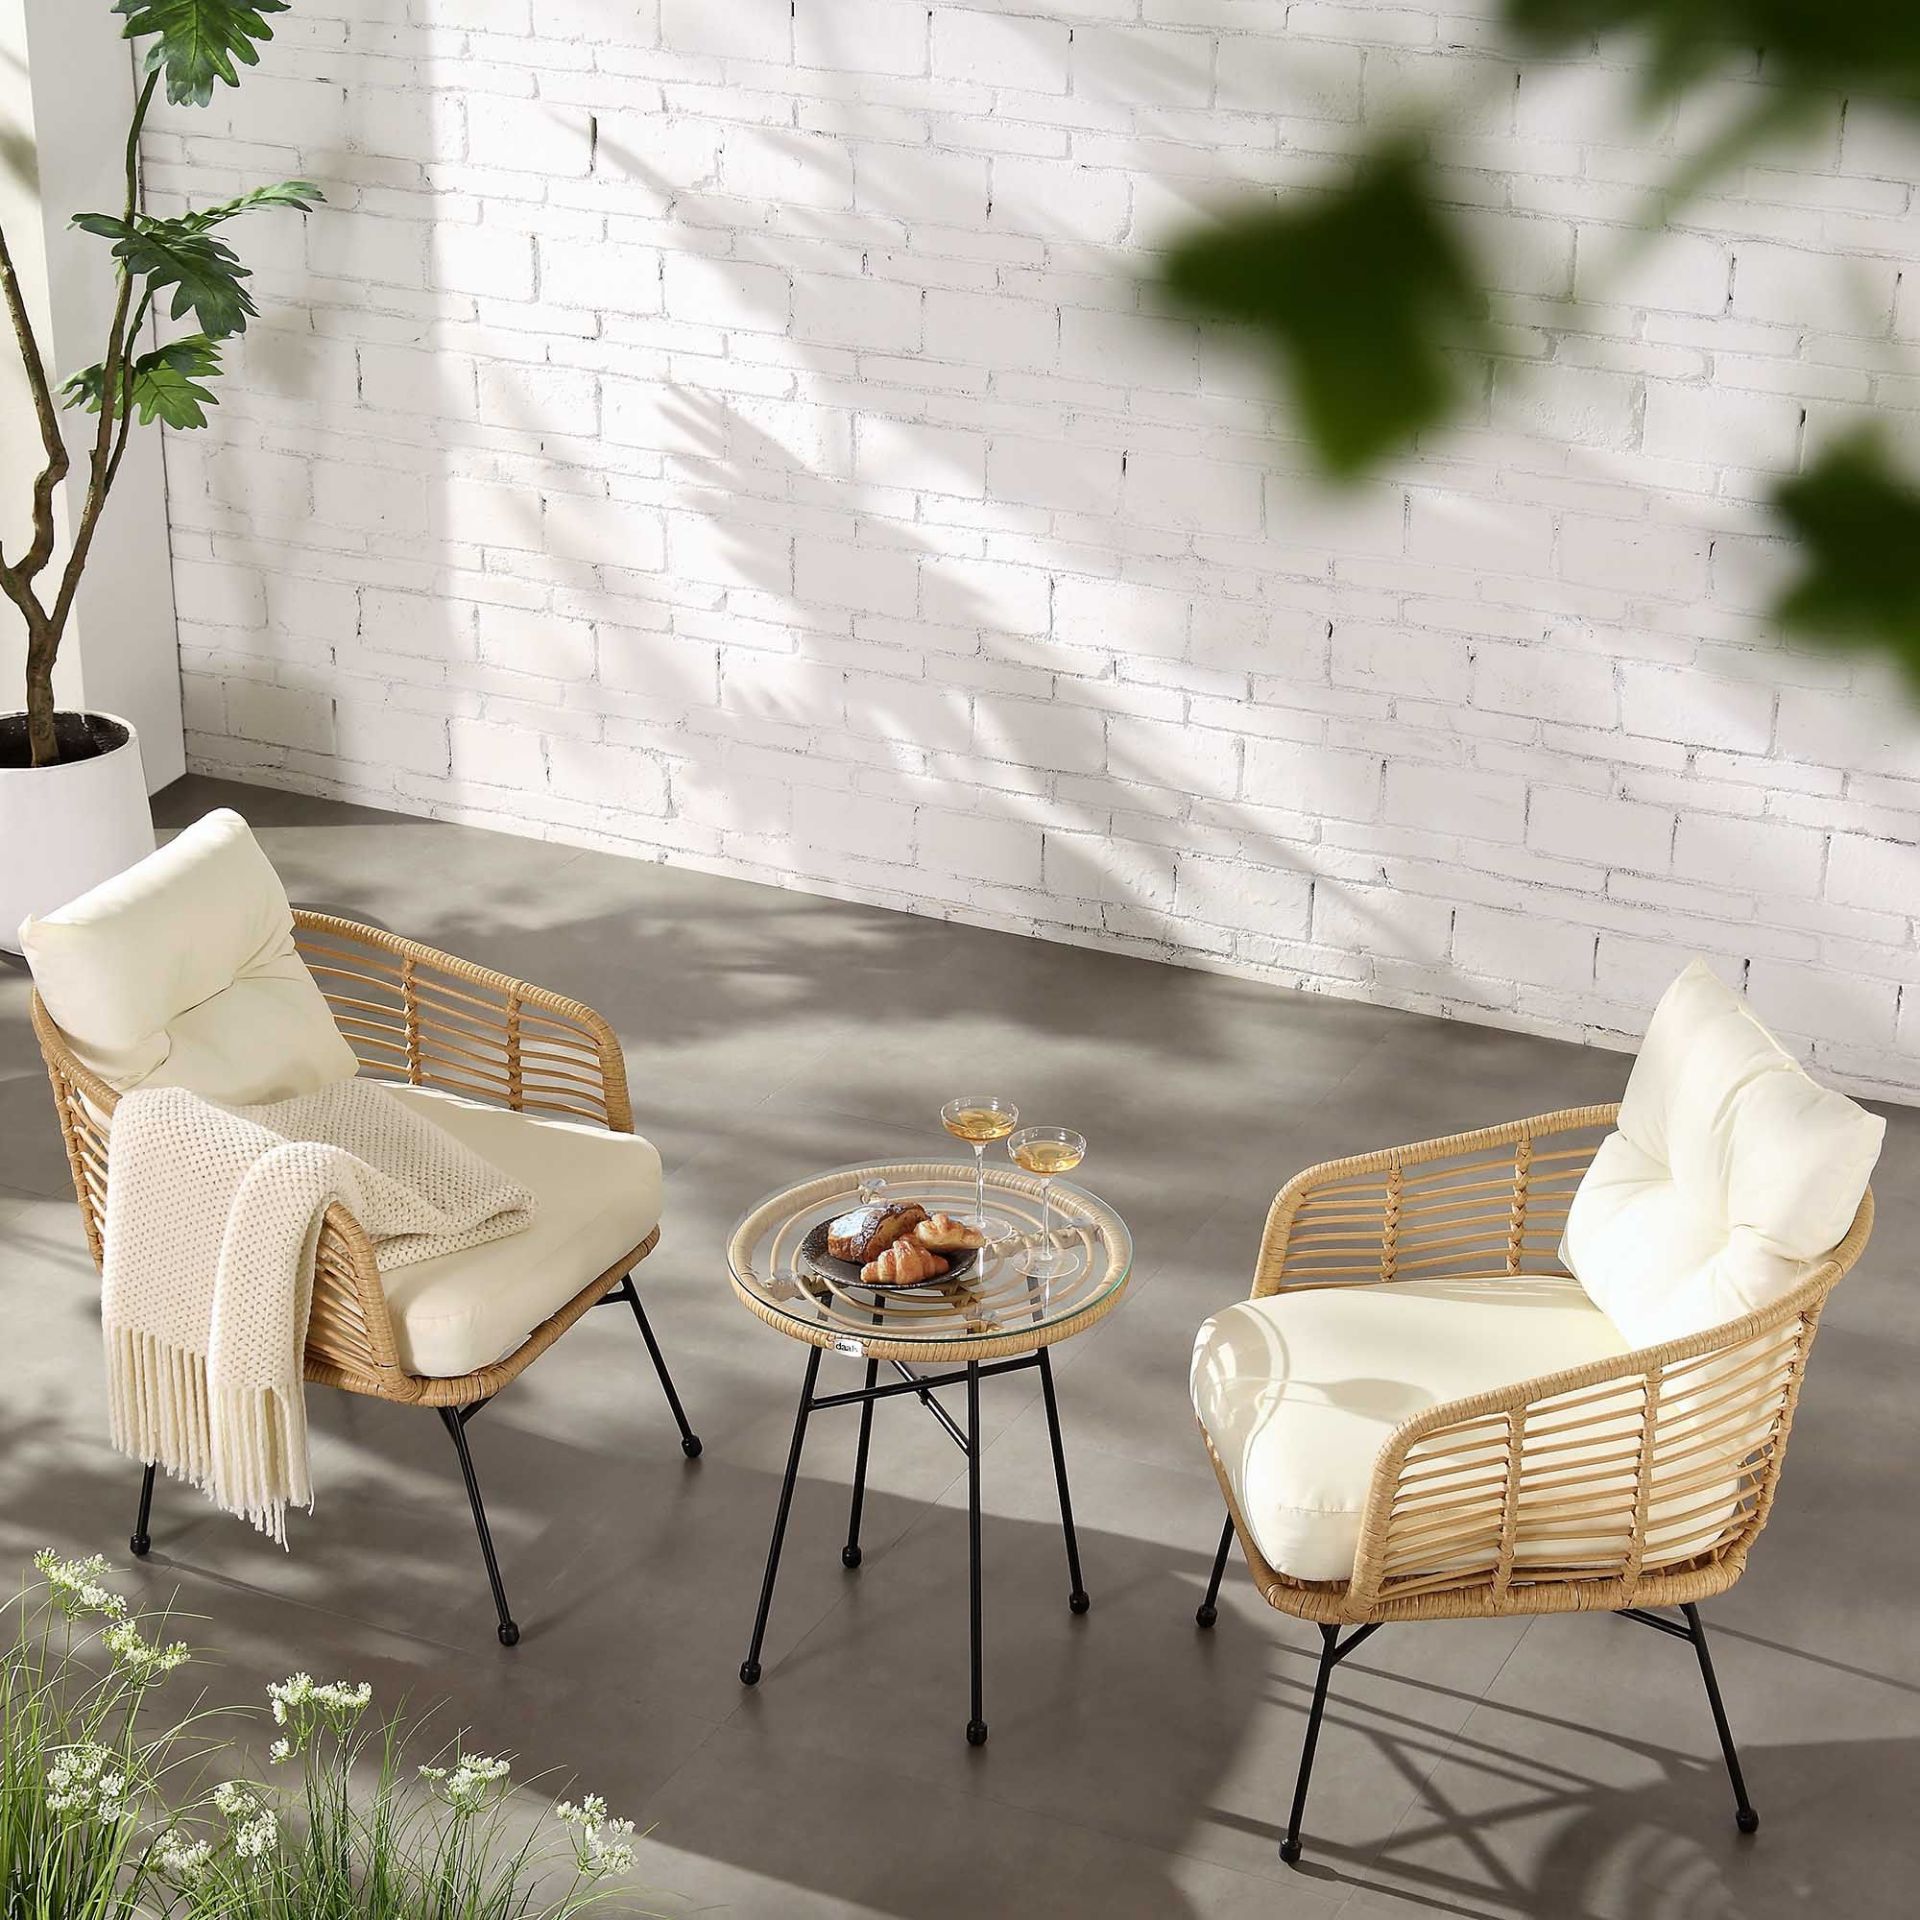 St Loy Natural Rattan Bistro Set with Table - R14. RRP £499.99. Made from handwoven rattan effect PE